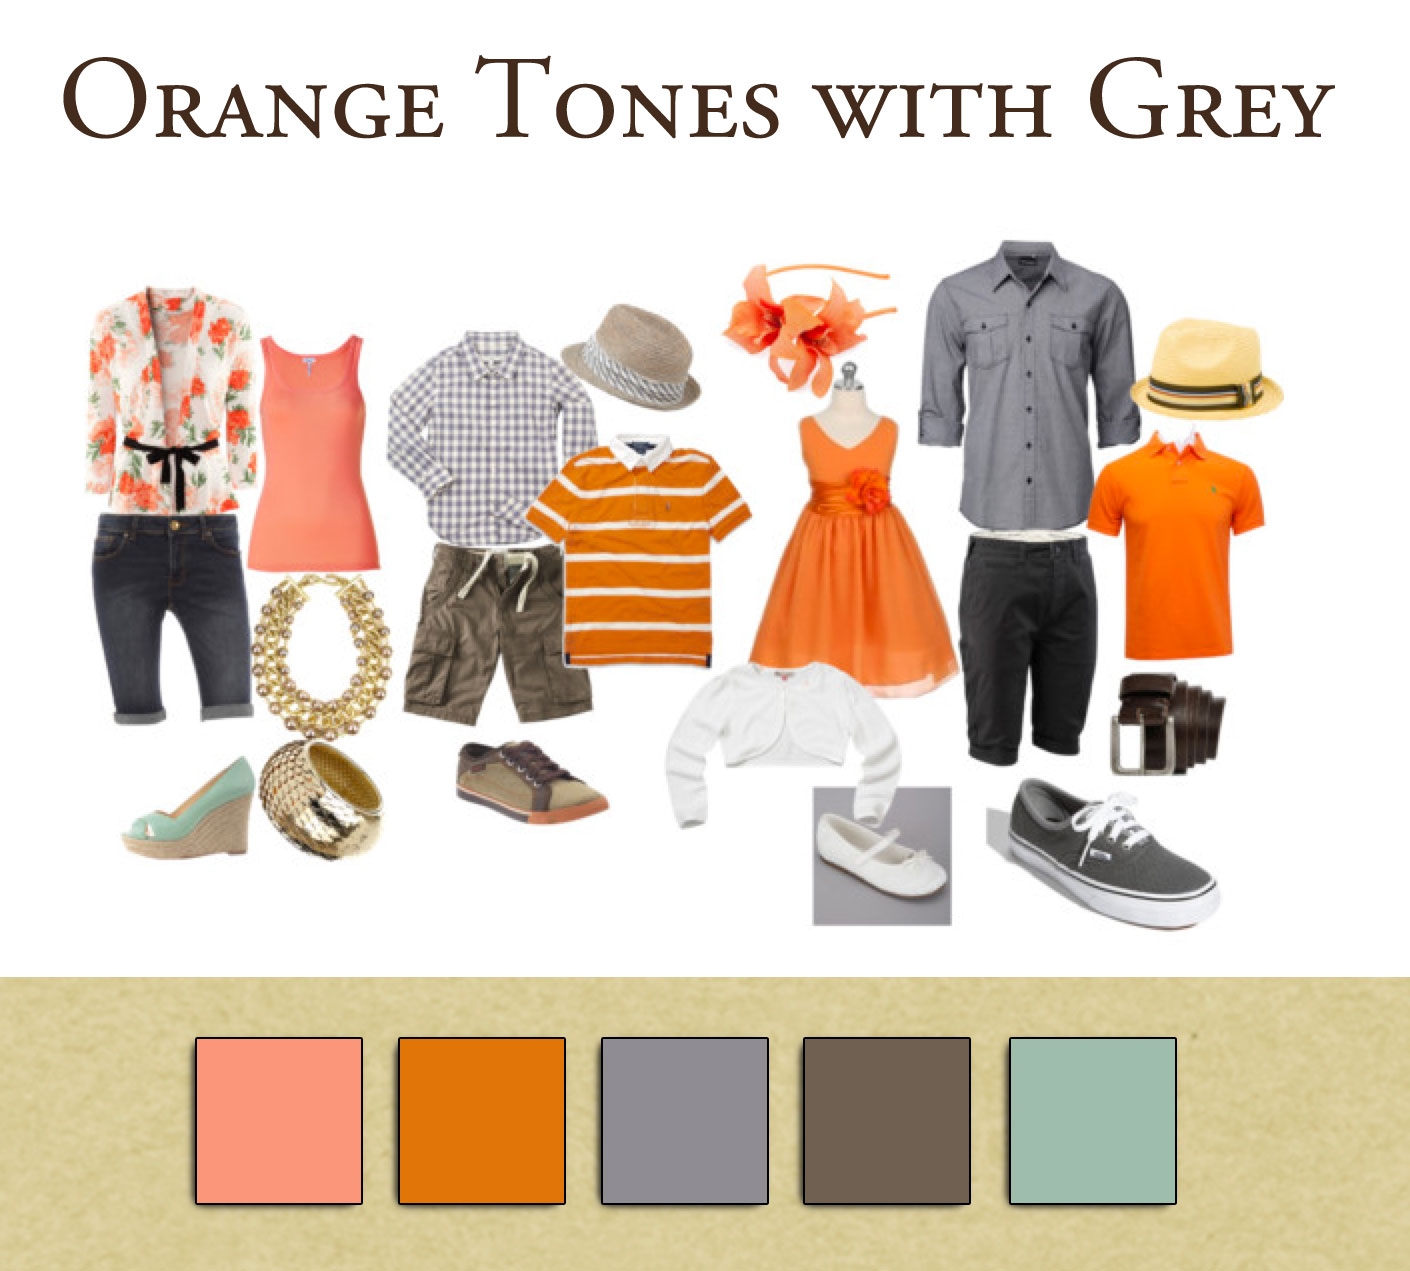 Family Outfits: Orange Tones with Grey